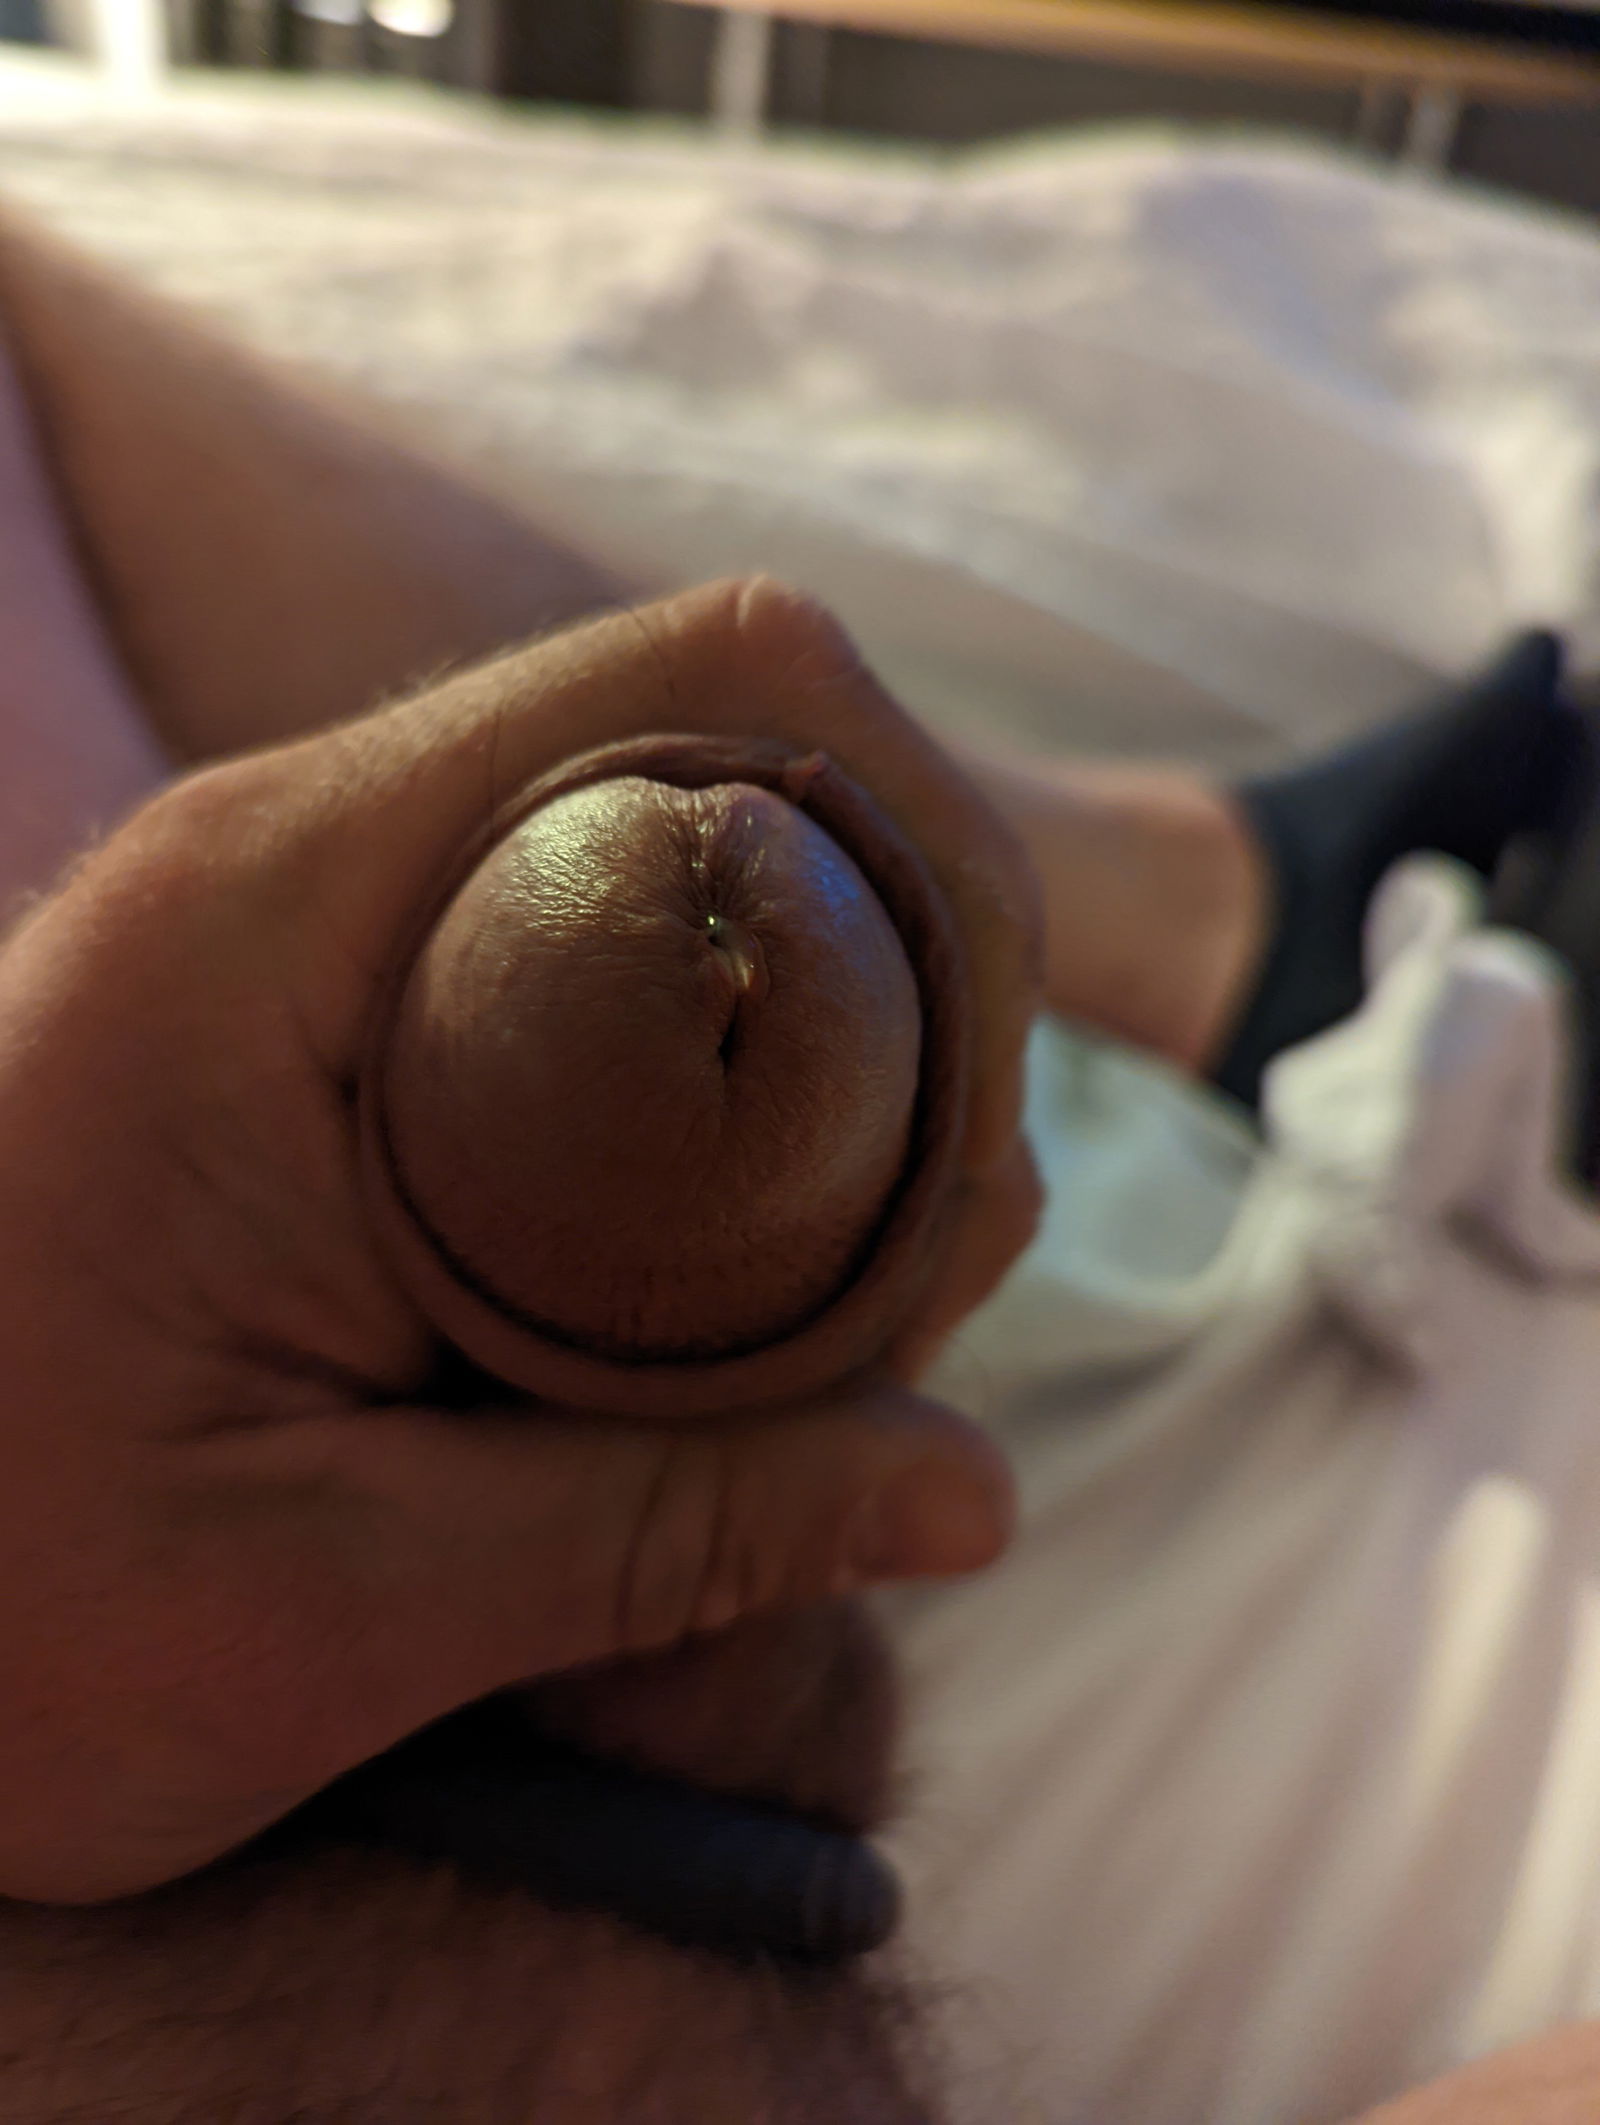 Photo by Micah87 with the username @Micah87,  April 29, 2022 at 3:55 AM. The post is about the topic Precum drip and the text says 'bored and horny'